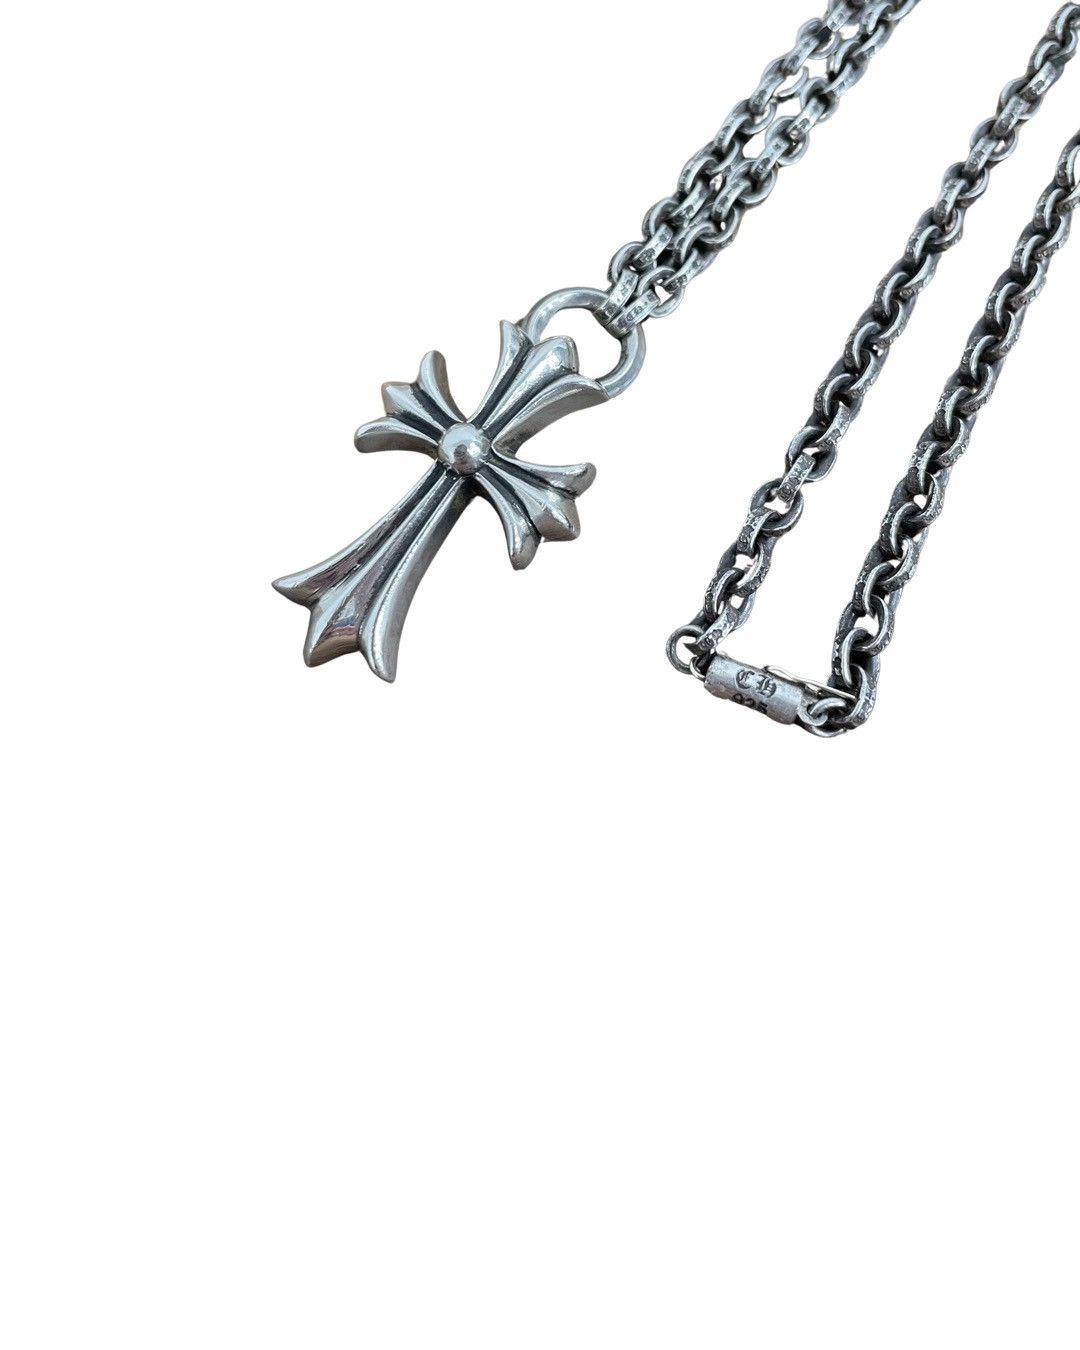 Paper chain cross necklace - 2